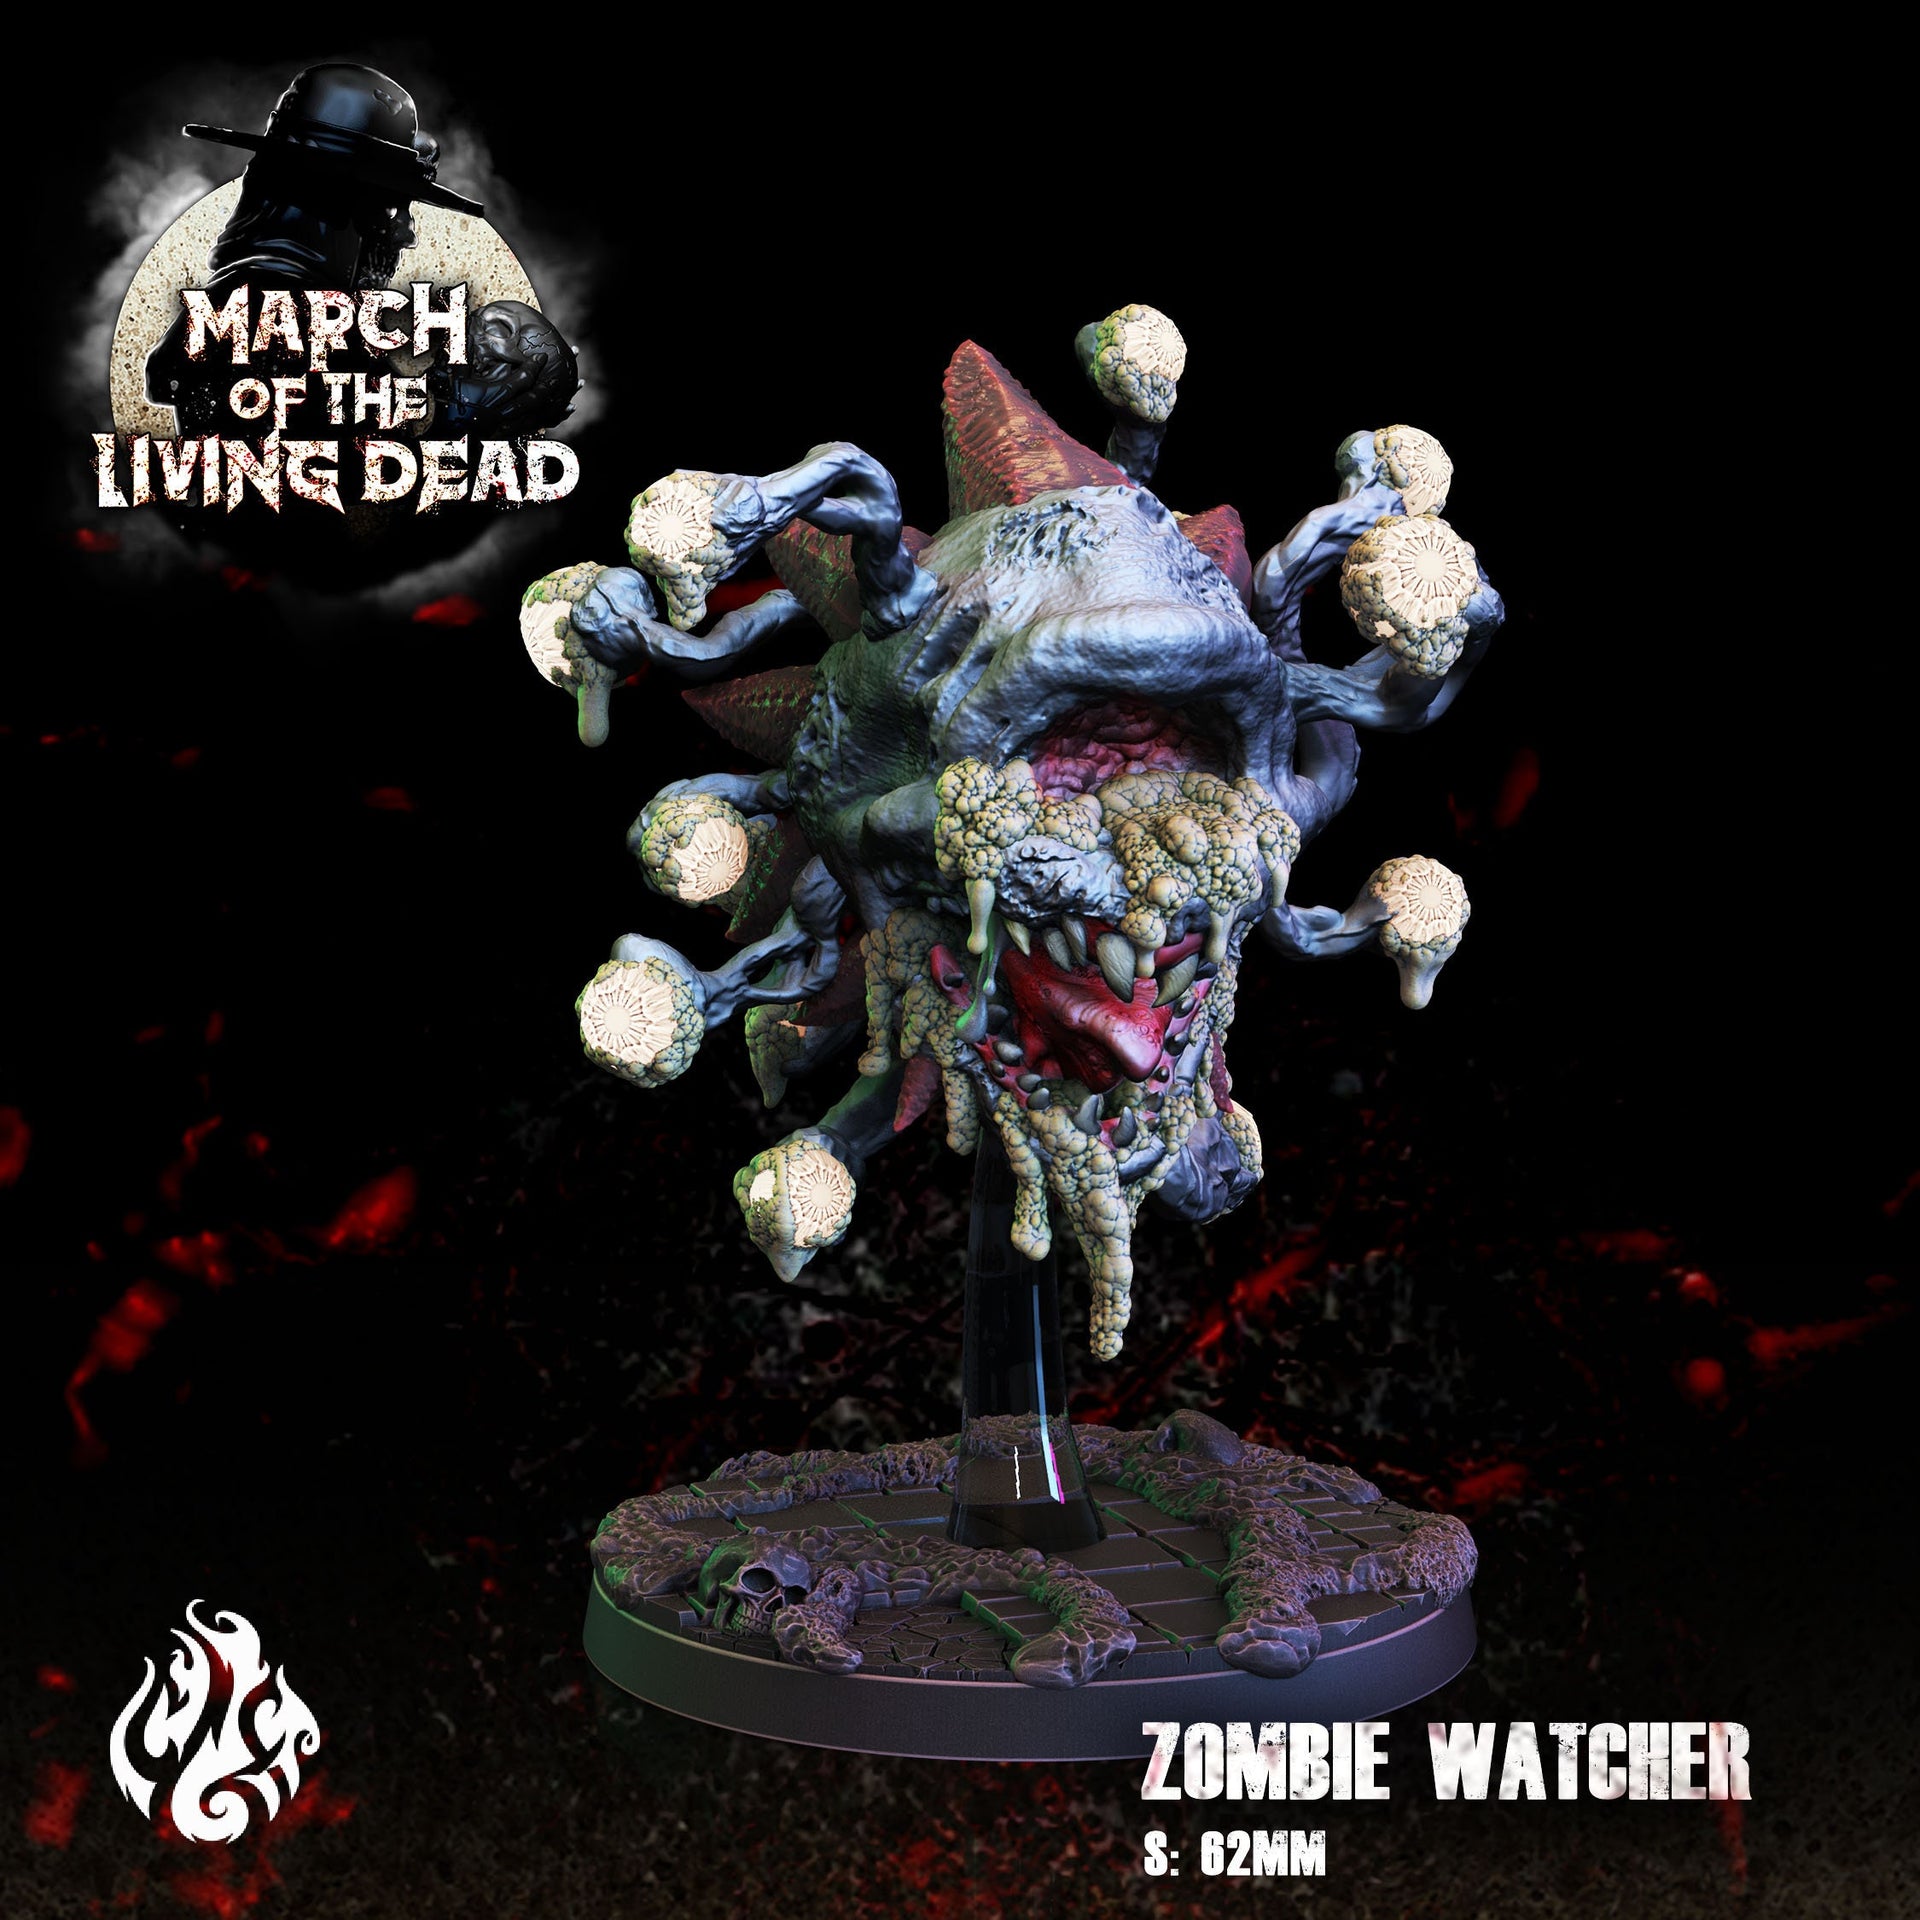 Zombie Watcher - Crippled God Foundry - March of the Living Dead 